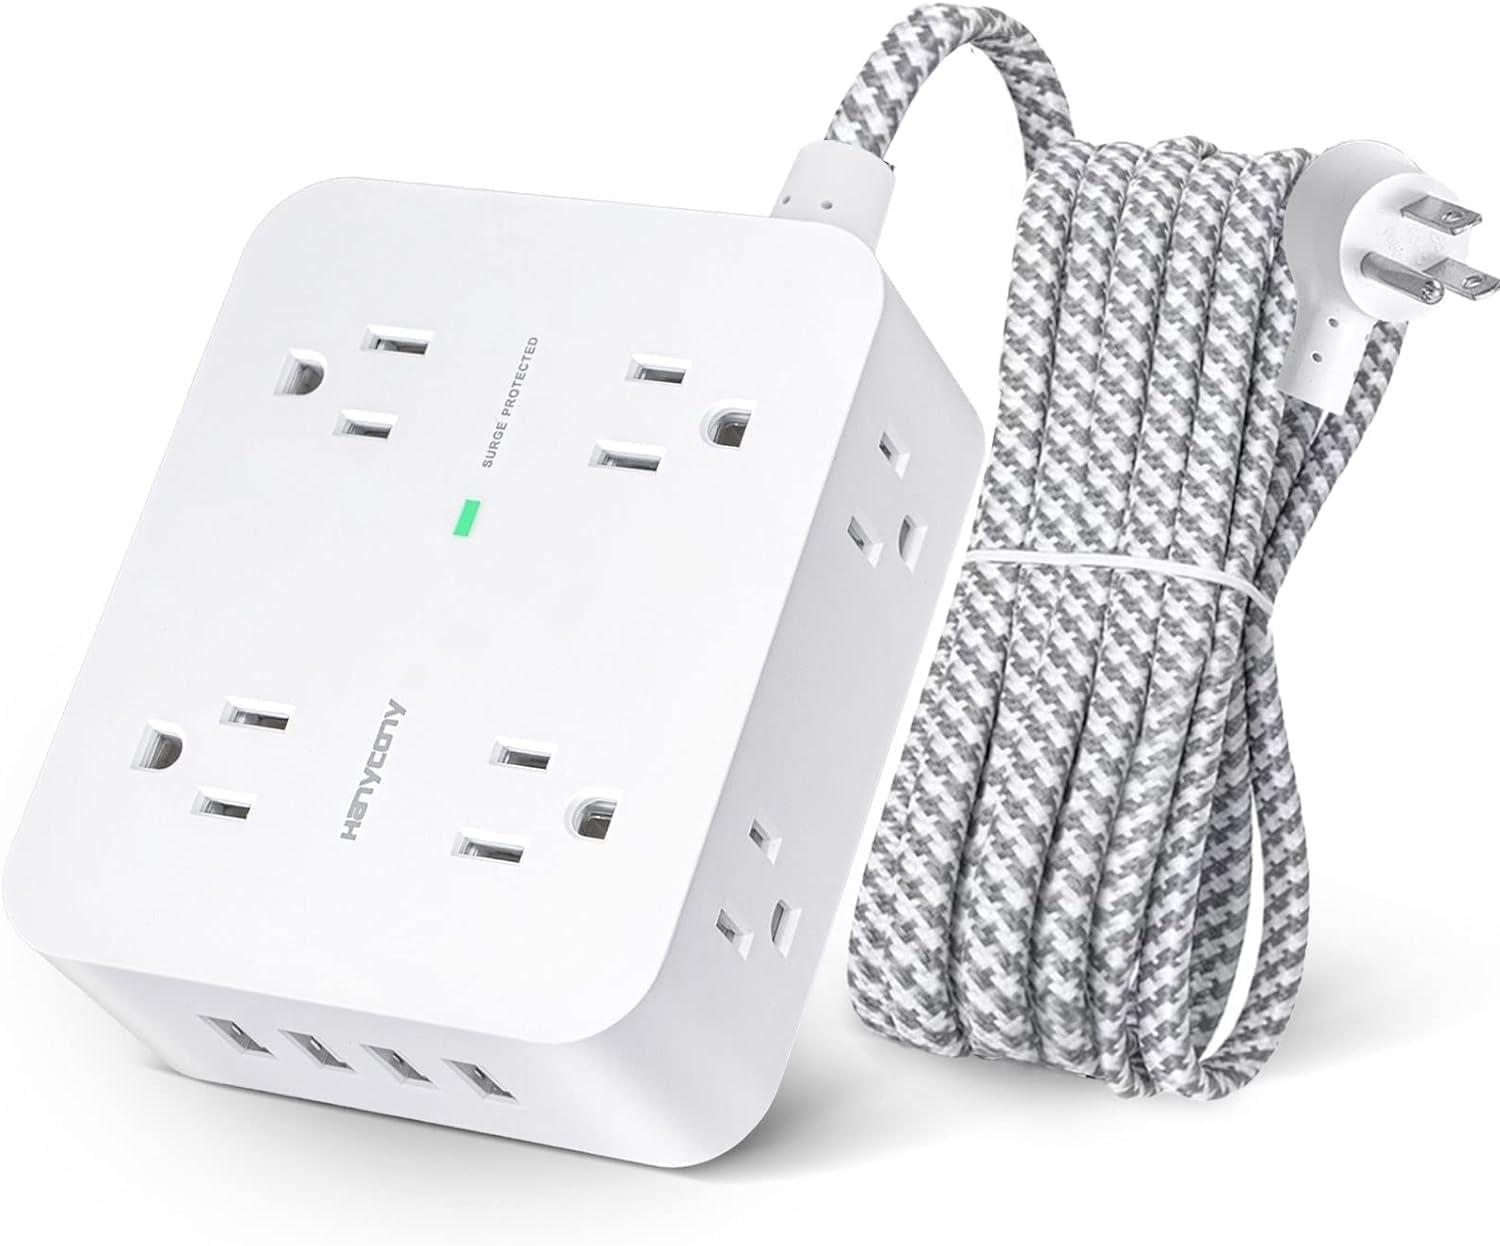 Surge Protector 8 Outlet with 4 USB Power Strip for $9.99